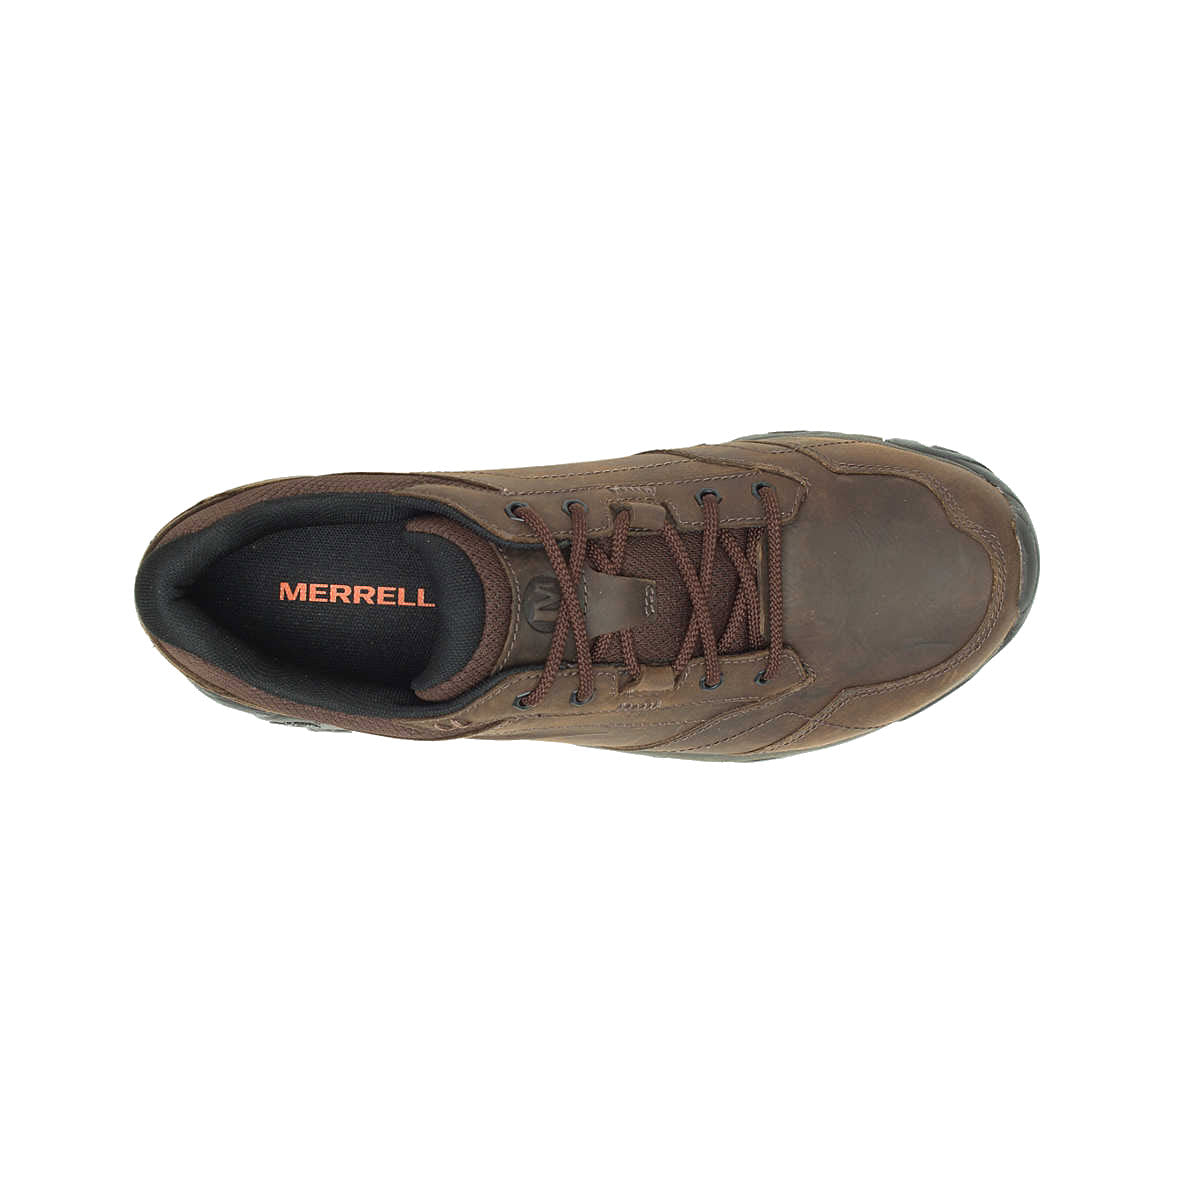 Top view of a single brown Merrell Moab Adventure Lace WP Oxford Dark Earth hiking shoe showing the laces and logo on the insole.